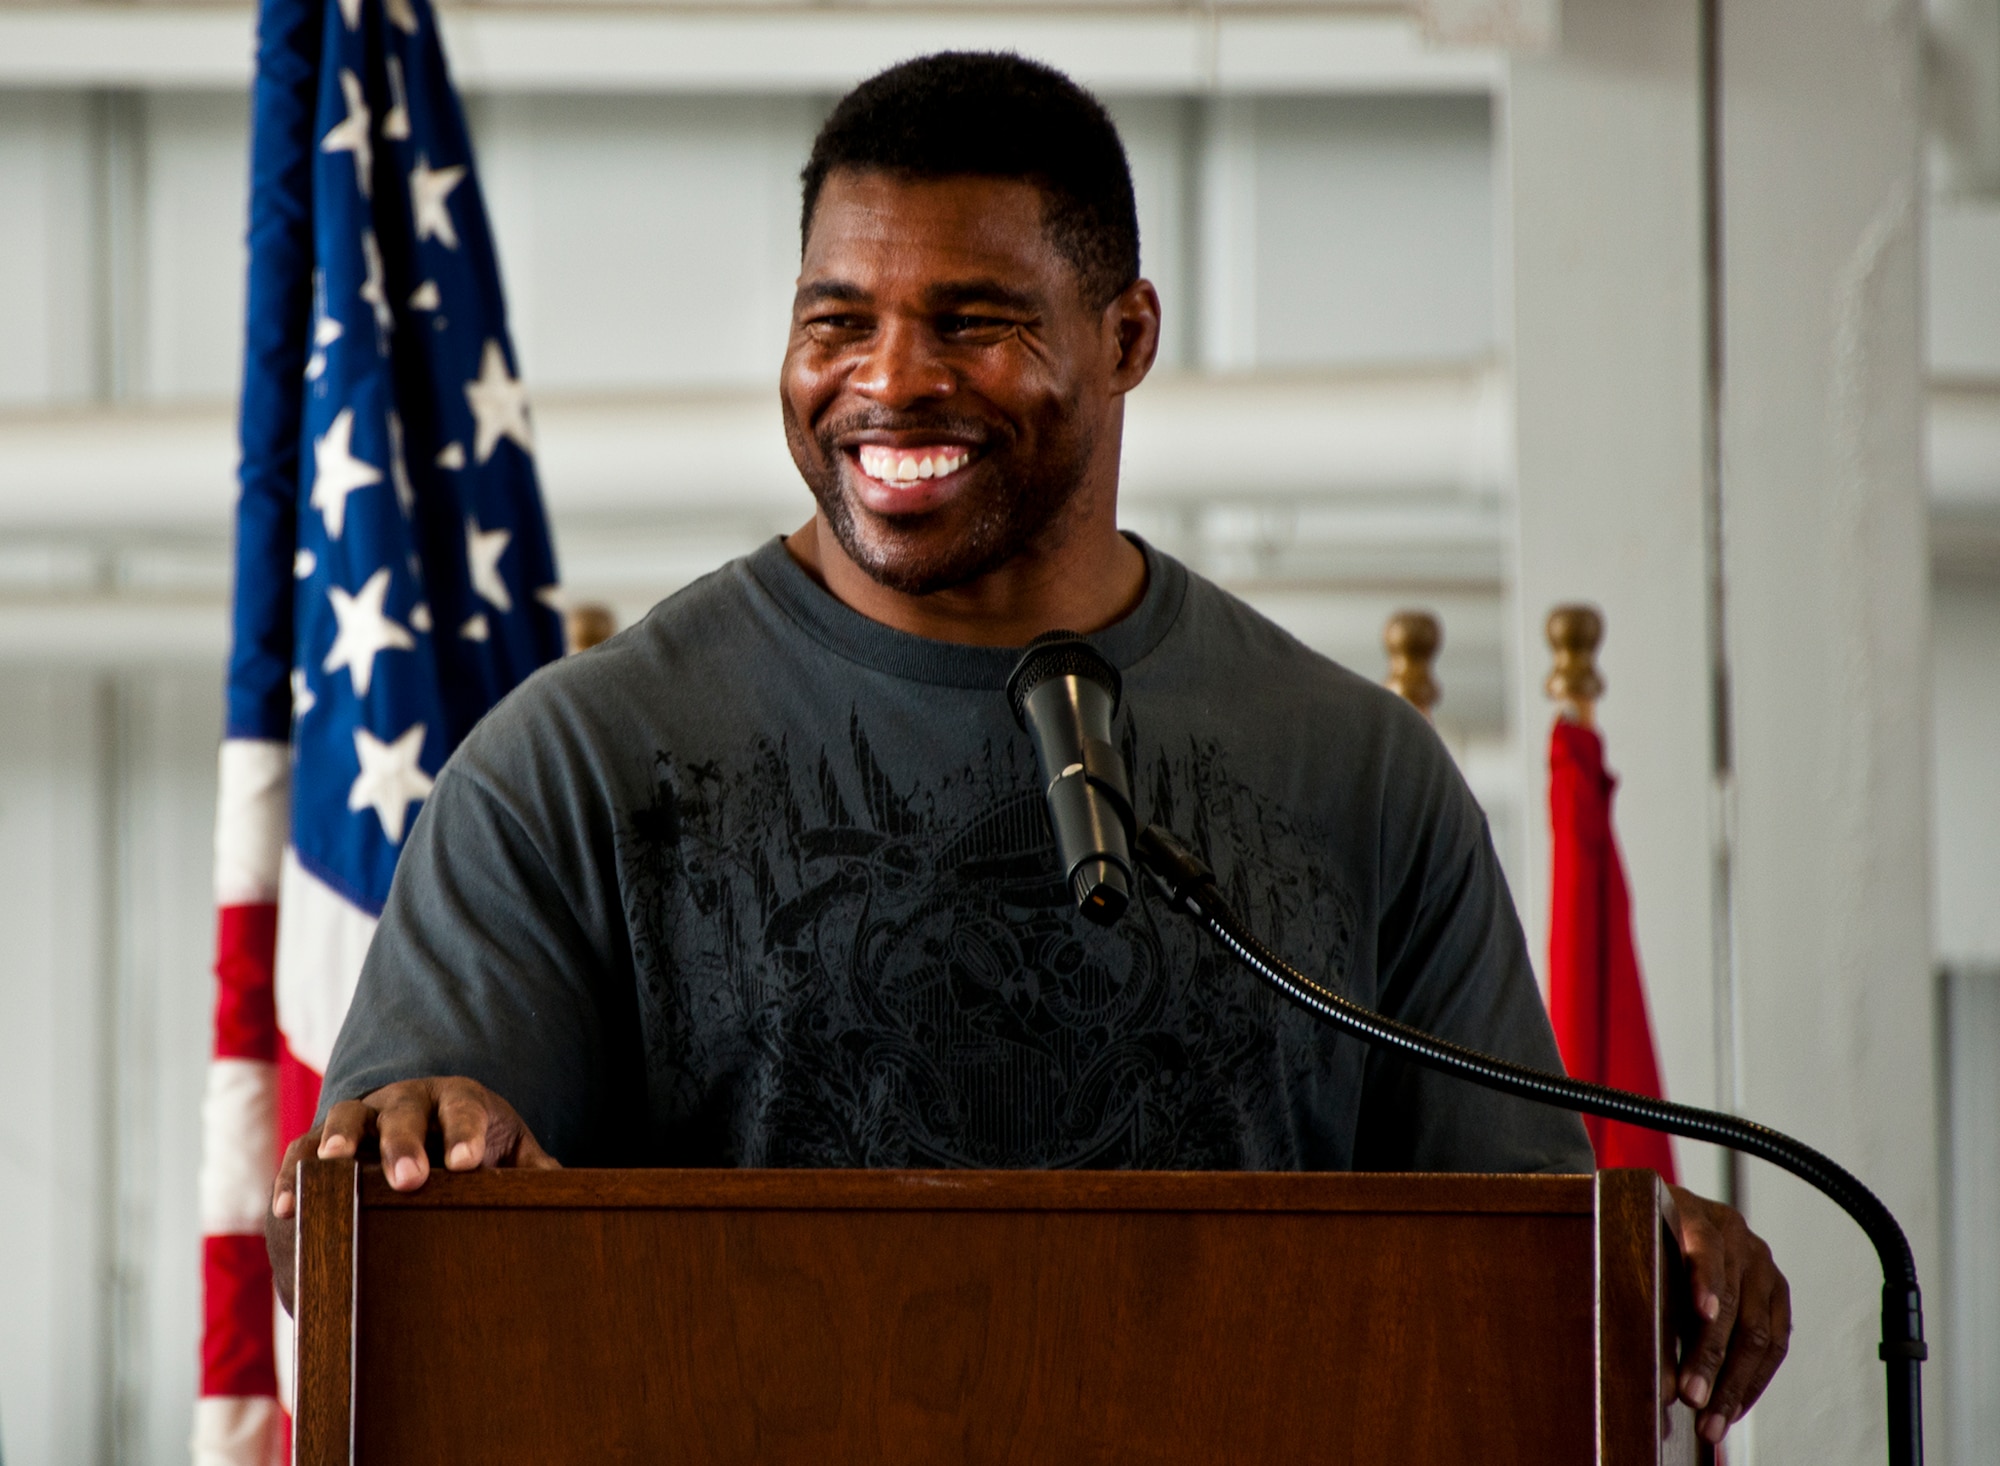 Herschel Walker spoke twice to large crowds of Team Eglin members about his life, career and the emotional and mental struggles he encountered throughout, during his visit to the base March 22.  His message was about resiliency and the importance of asking for help. (U.S. Air Force photo/Samuel King Jr.)